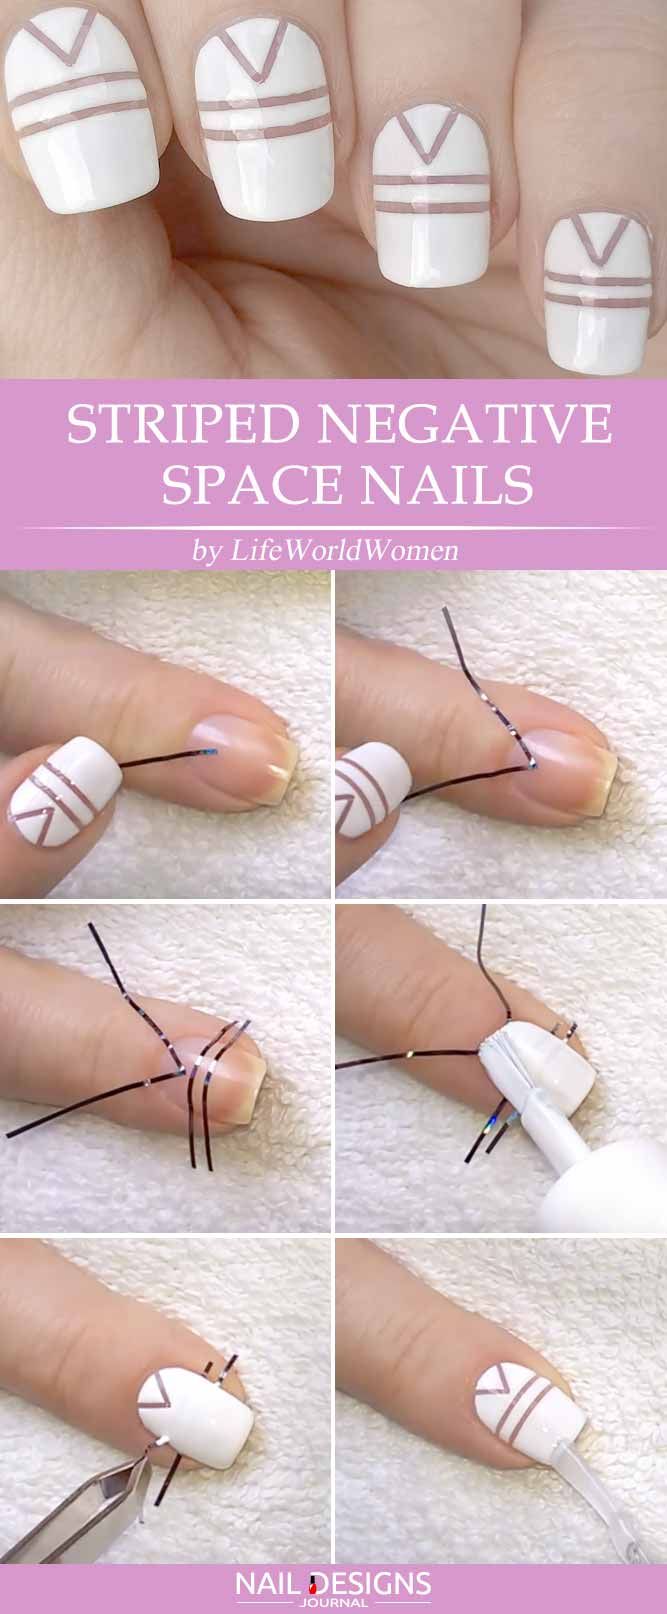 [ad_1]

Easy And Unique Striped Nails Ideas To Pull Of Right Now ★ See more: naildesignsjourna… #nails
Source by ShanayaAaliyah16
[ad_2]
			
			…